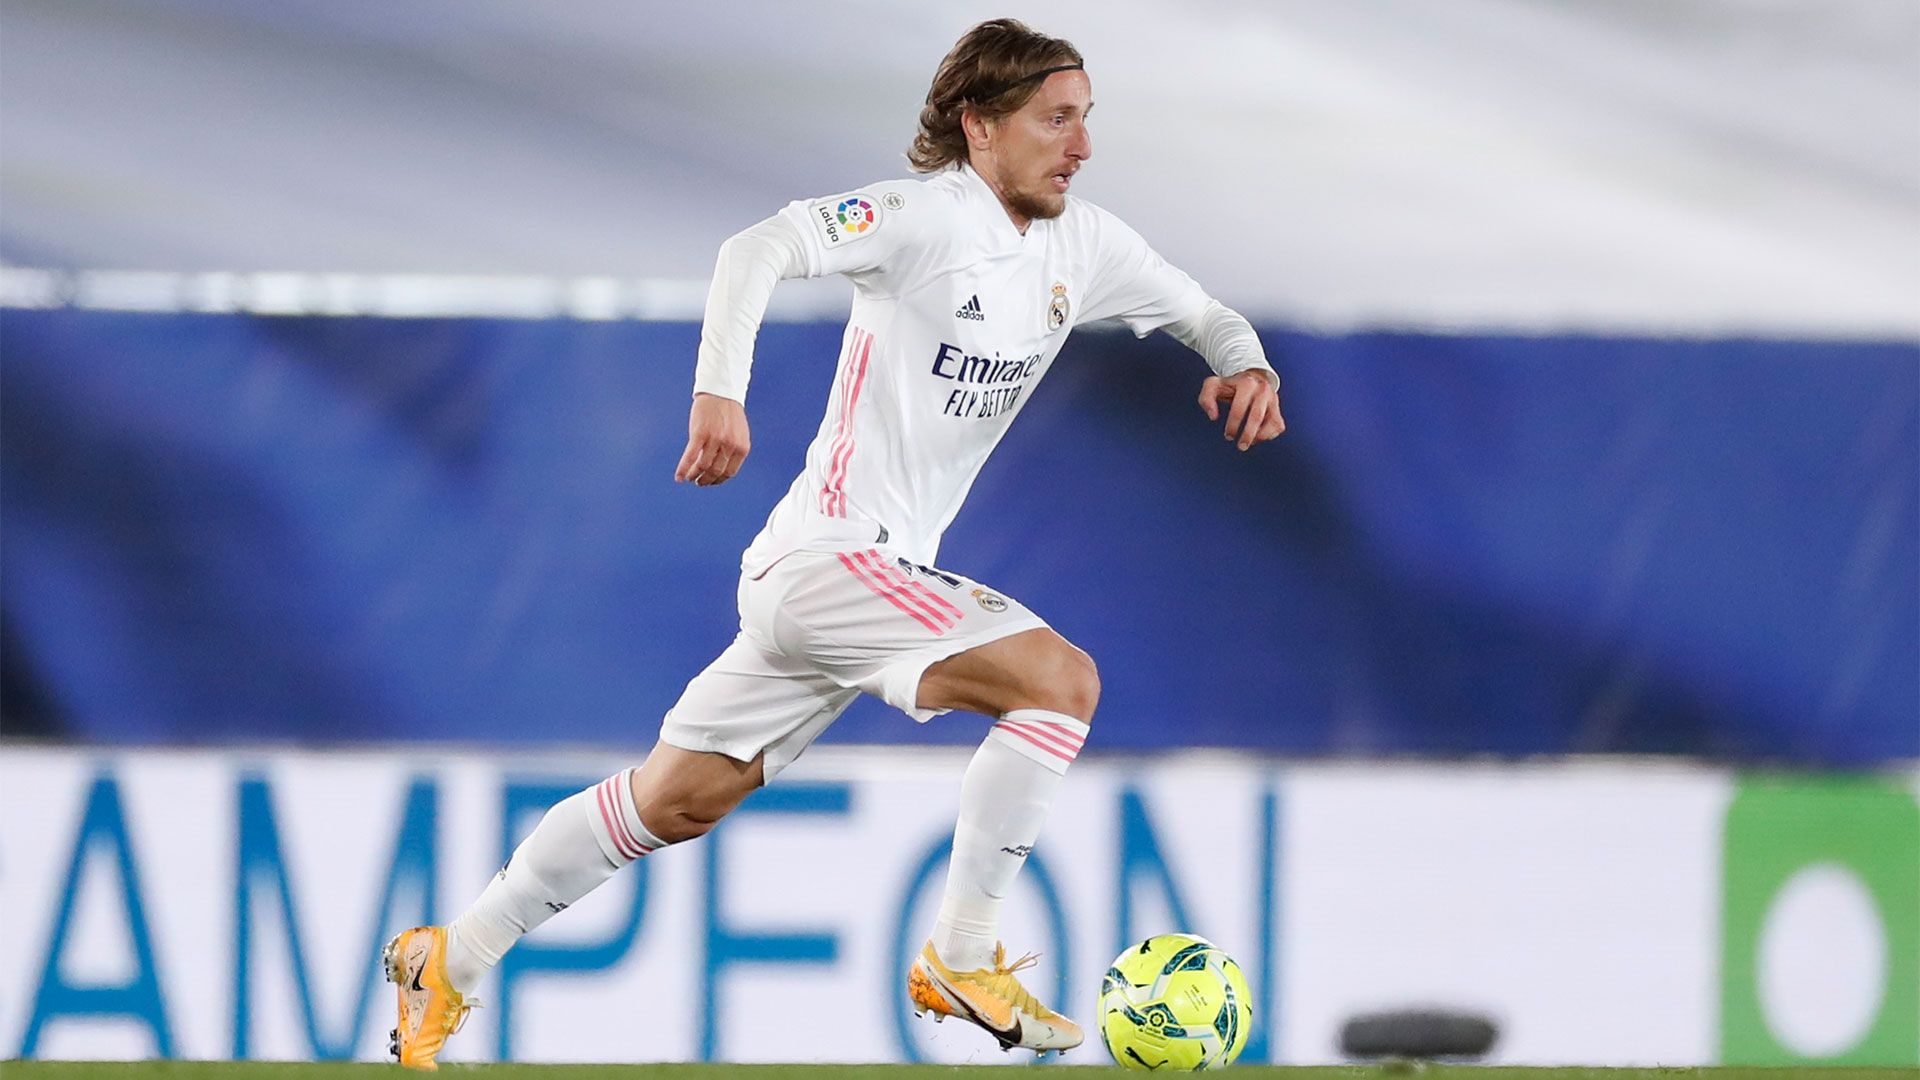 Modric has the most recoveries in LaLiga for Real Madrid. Real Madrid CF